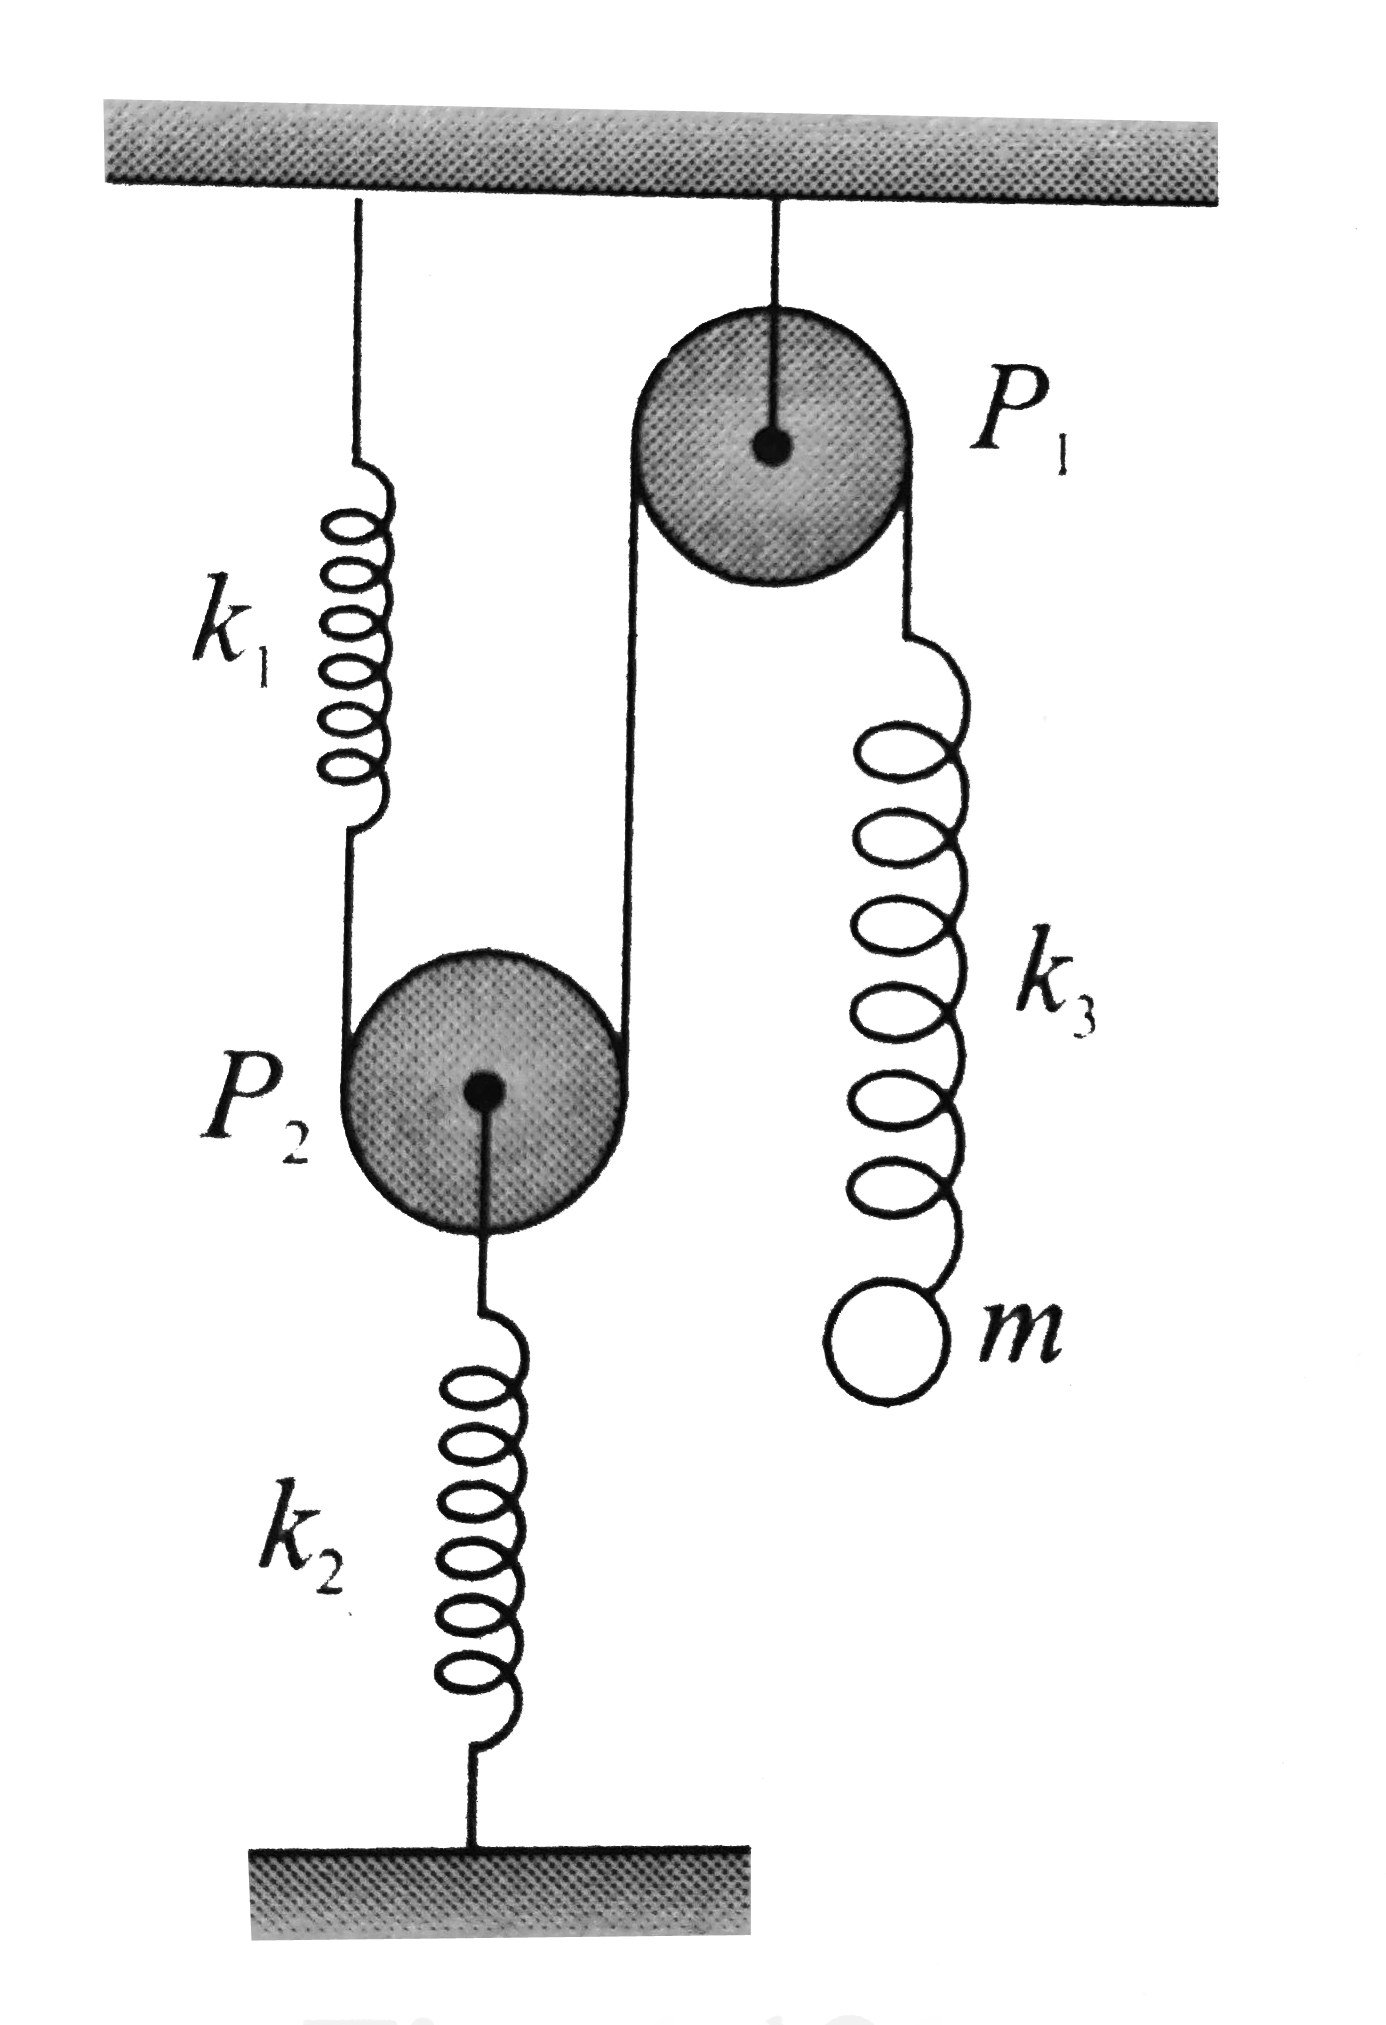 A body of mass m hangs from a smooth fixed pulley P(1) by the inextensible string fitted with the springs of stiffness k(1)  and k(2) . The string passes over the smooth light pulley P(2) which is connected with another ideal spring of stiffness k(2). Find the period of oscillation of the body.